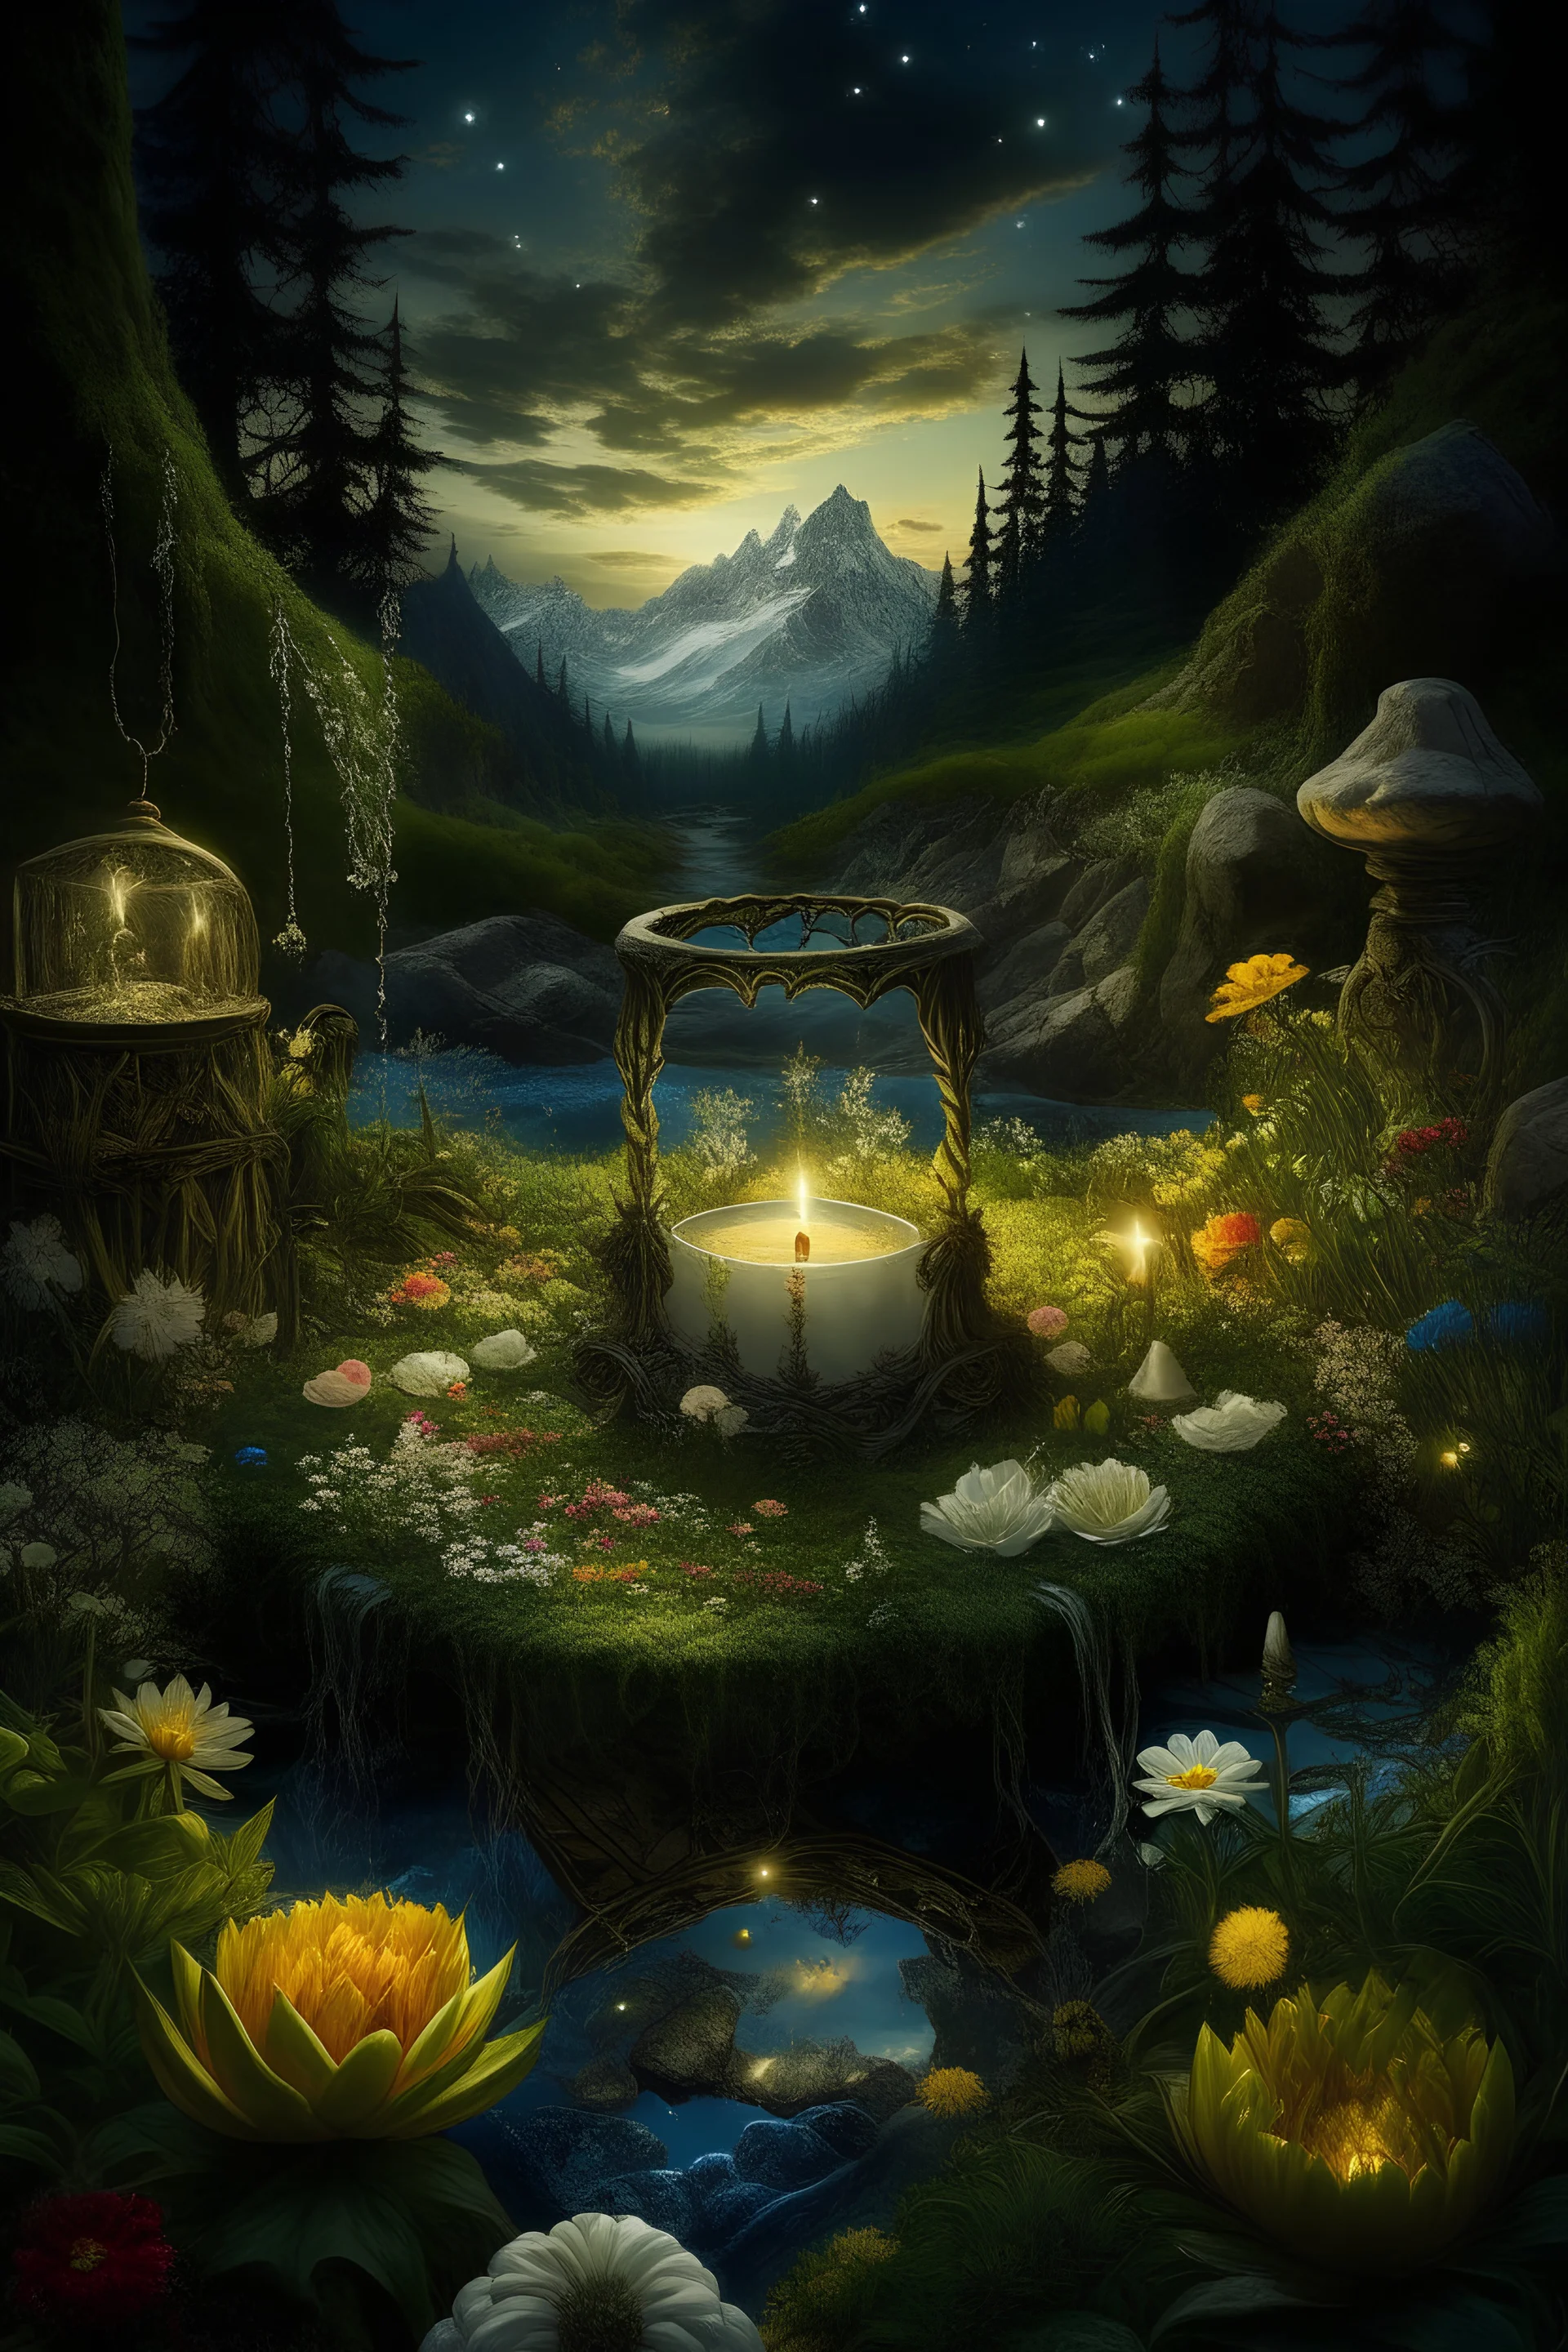 Hyperrealism against the background of a spring landscape in the forest +mirror with a tsunami whirlpool +mountains +ritual +candles+dried flowers+wildflowers+moss++decoupage of flowers+embroidery technique+braided beads+vine+moonlit night,fabulous landscape,surrealism,realism,naturalism,dot technique,microdetalization,high detail objects,digital illustration,volumetric clarity,dark fantasy,dark botanical, professional photo